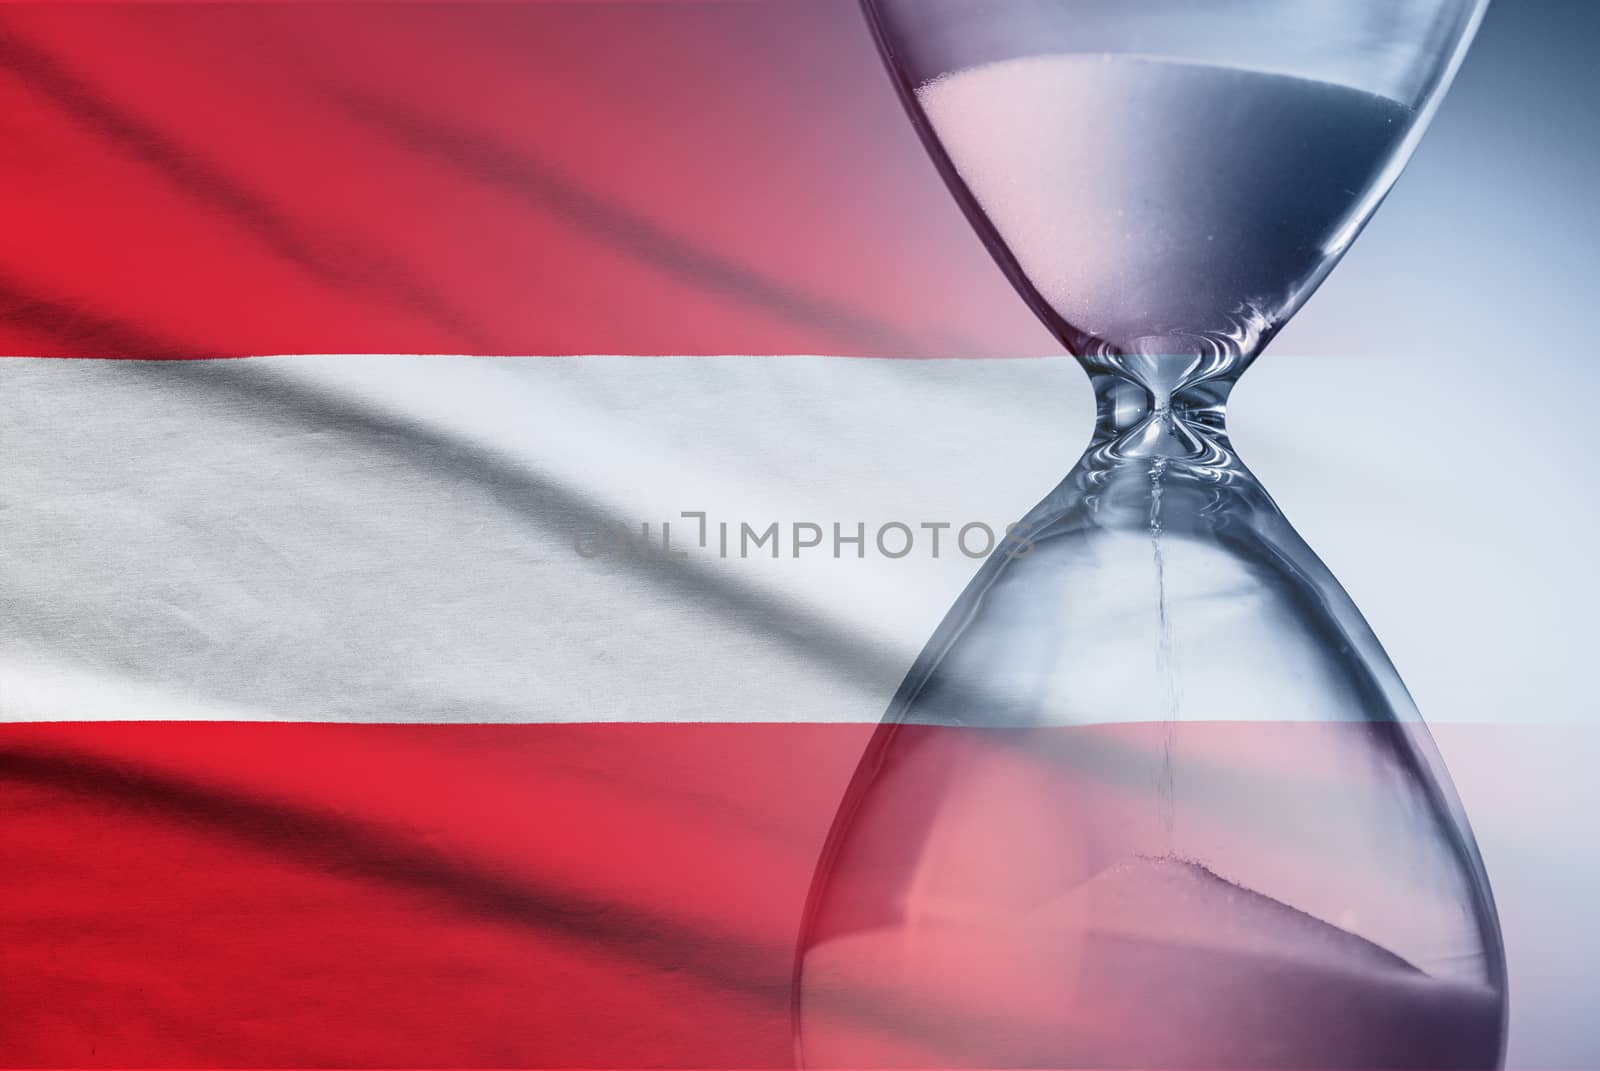 Flag of Austria with superimposed hourglass with running sand conceptual of deadlines, countdown, passing time, urgency, crisis and time management